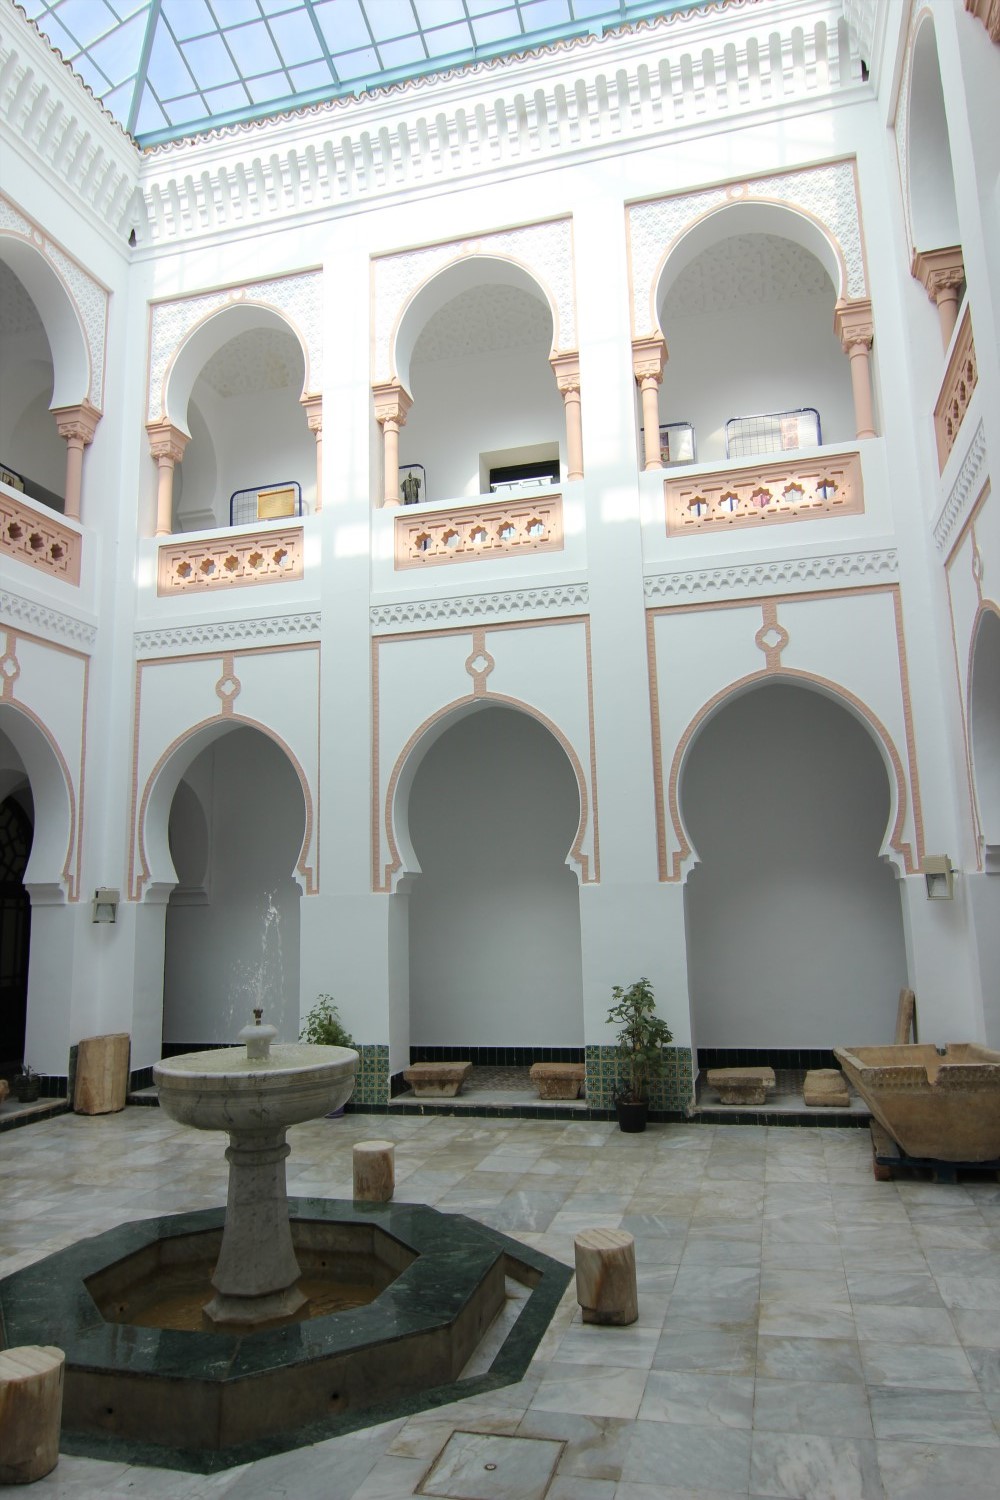 View of the right lateral side of the courtyard, showing marble fountain